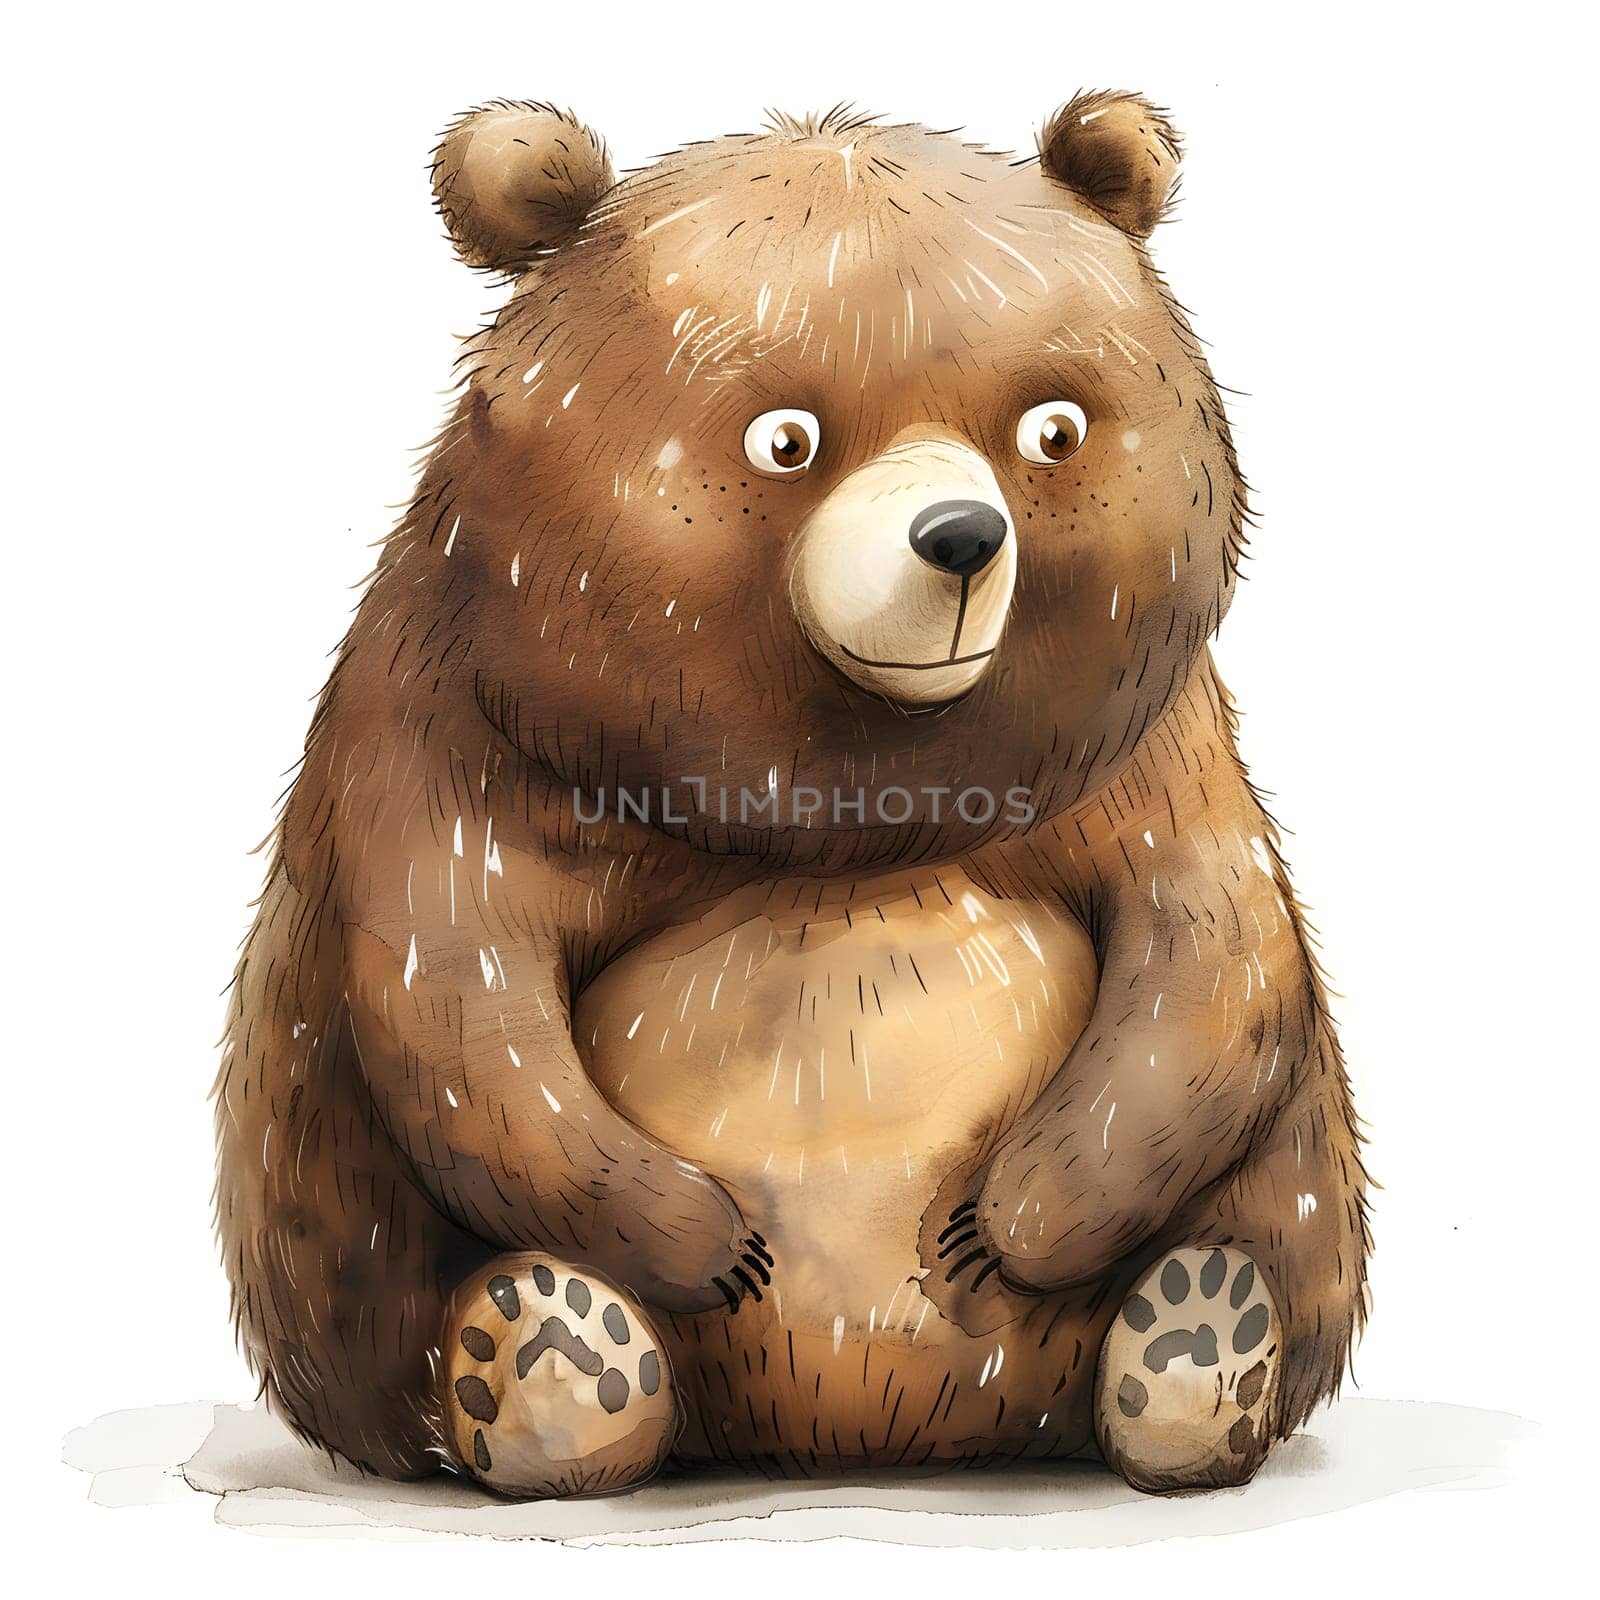 A carnivorous brown bear, either a grizzly or a Kodiak, is seated with its paws crossed, gazing towards the camera. It is a terrestrial animal, resembling a toy as it rests by a tree